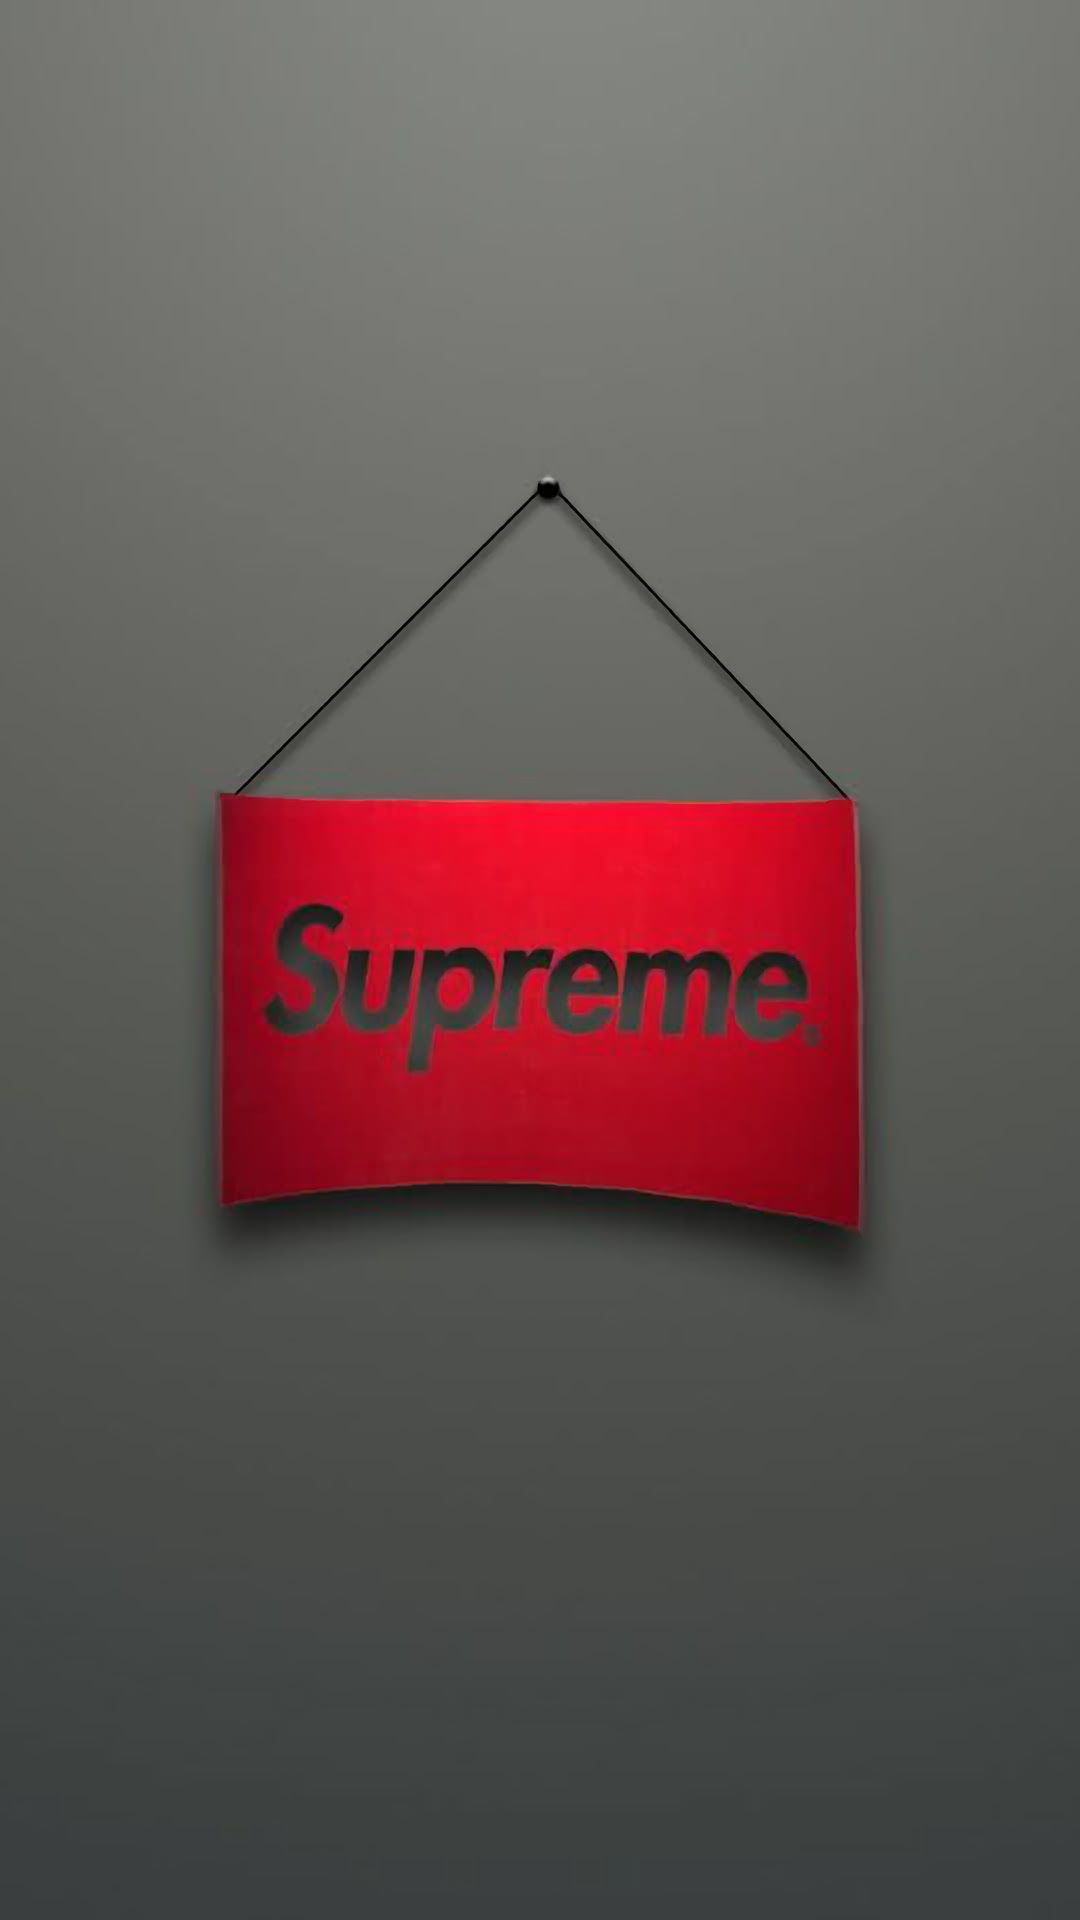 Supreme Iphone Wallpapers